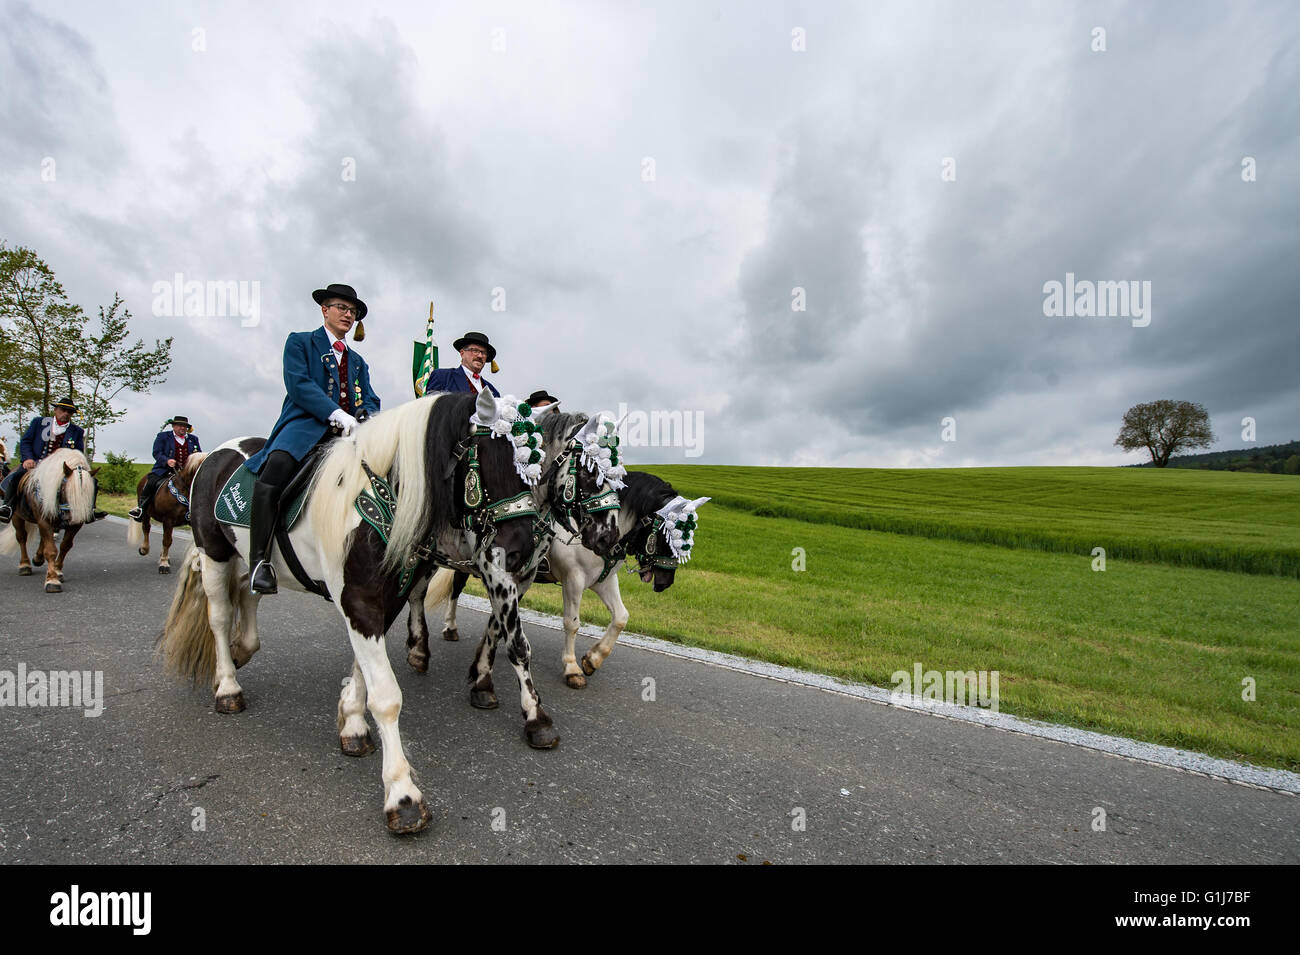 Participants in the Koetzing Pentecost Ride ride their horses near Bad Koetzing, Germany, 16 May 2016. The procession of 900 horsemen is one of the oldest traditional events in Bavaria. The 'Maennerleut' make an around seven-kilometer pilgrimage on the back of richly adorned horses from Bad Koetzting to St. Nicholas' Church in Steinbuehl. Photo: ARMIN WEIGEL/dpa Stock Photo